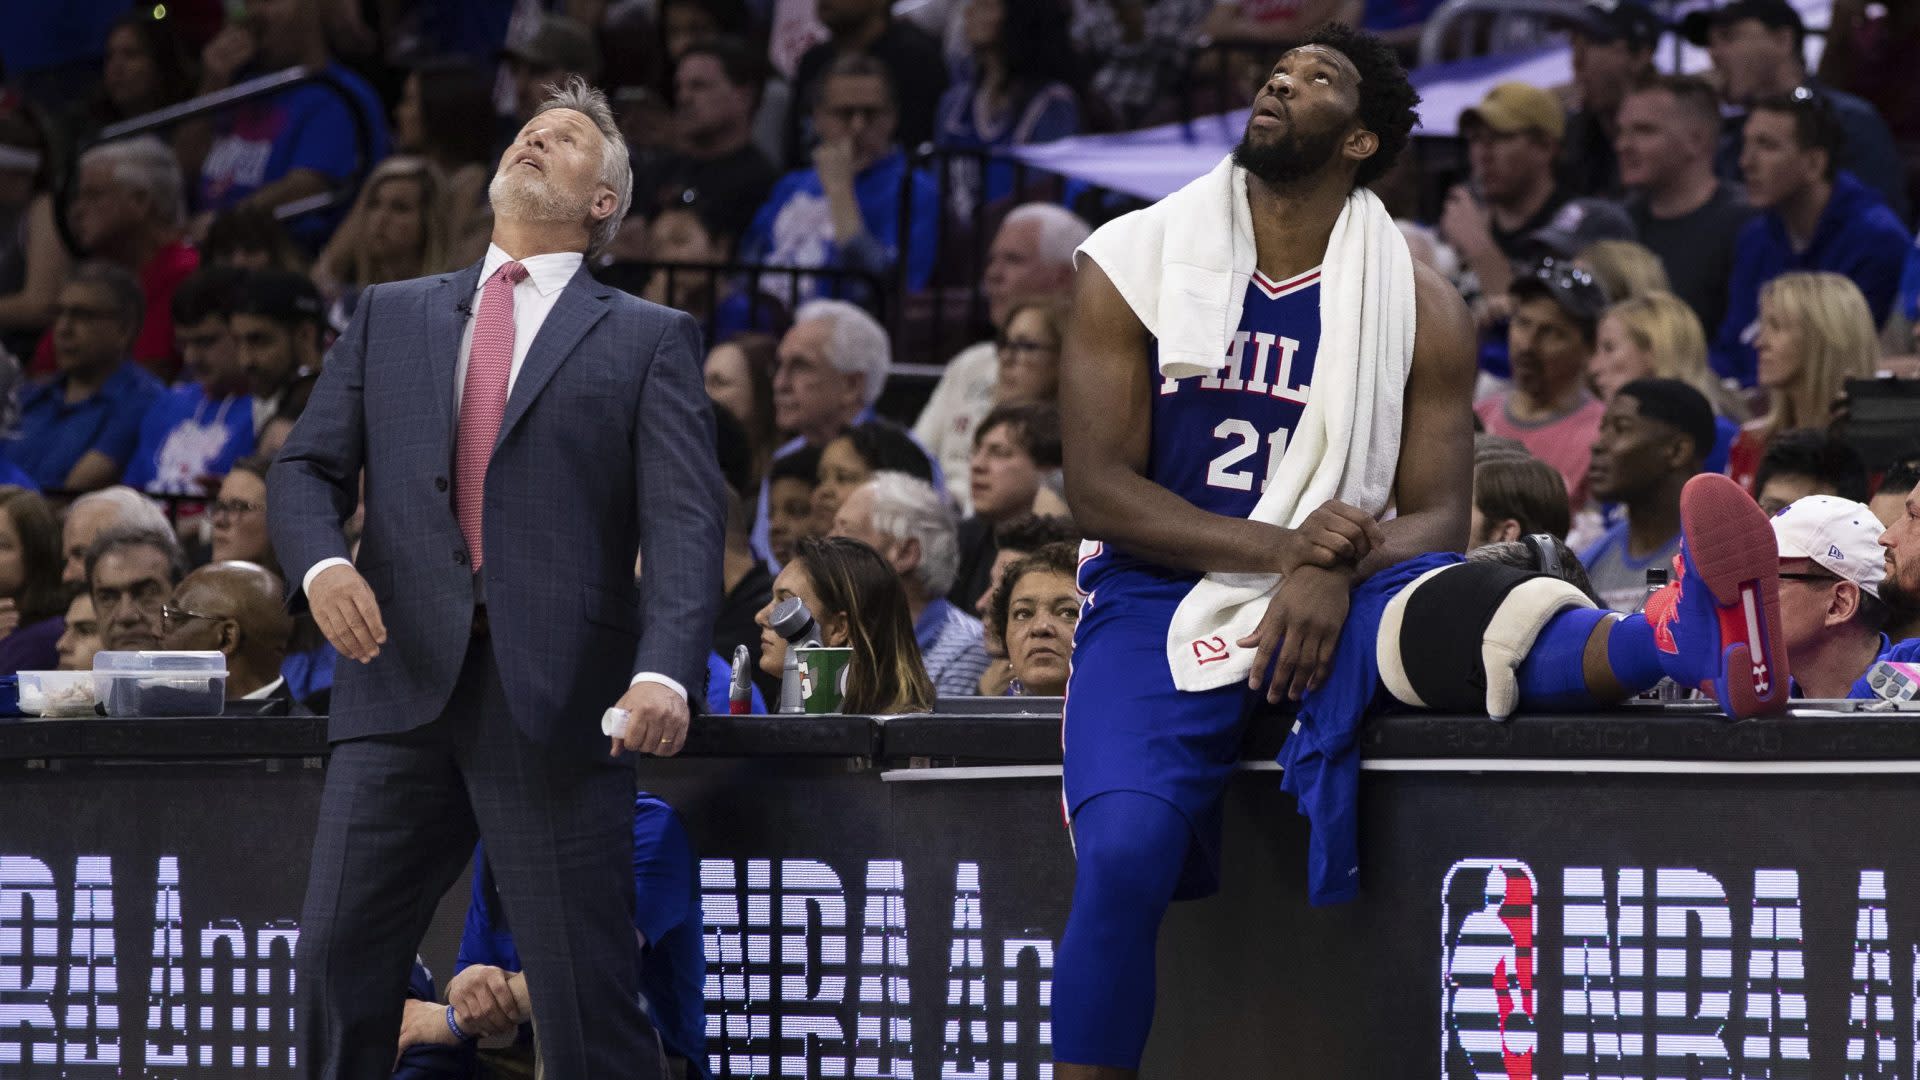 Joel Embiid will play for Philly in Game 2; Jared Dudley out for Brooklyn